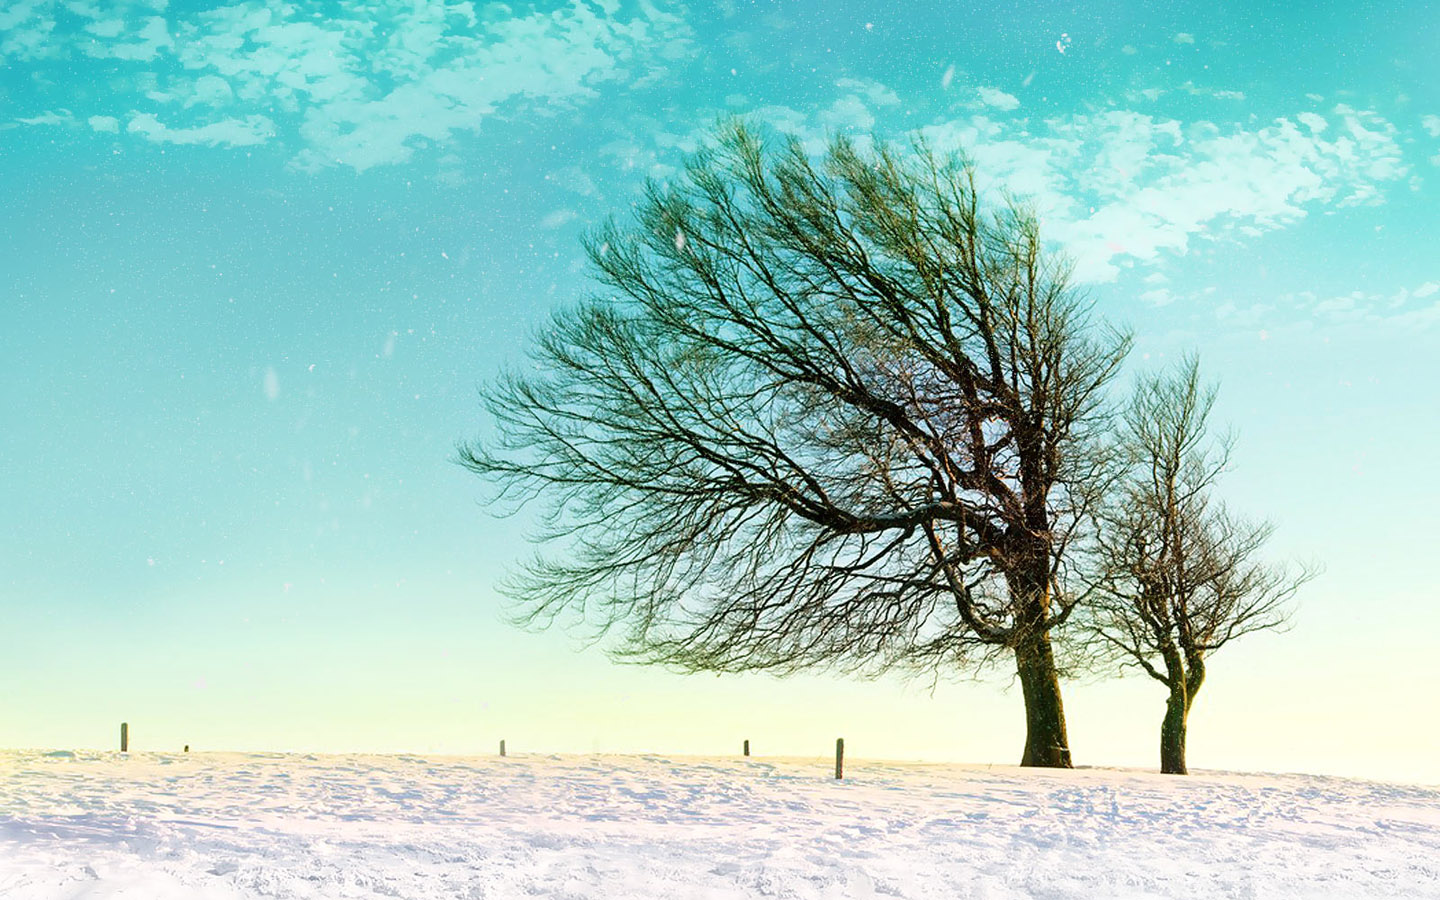 Snow couple dating wallpaper quietly